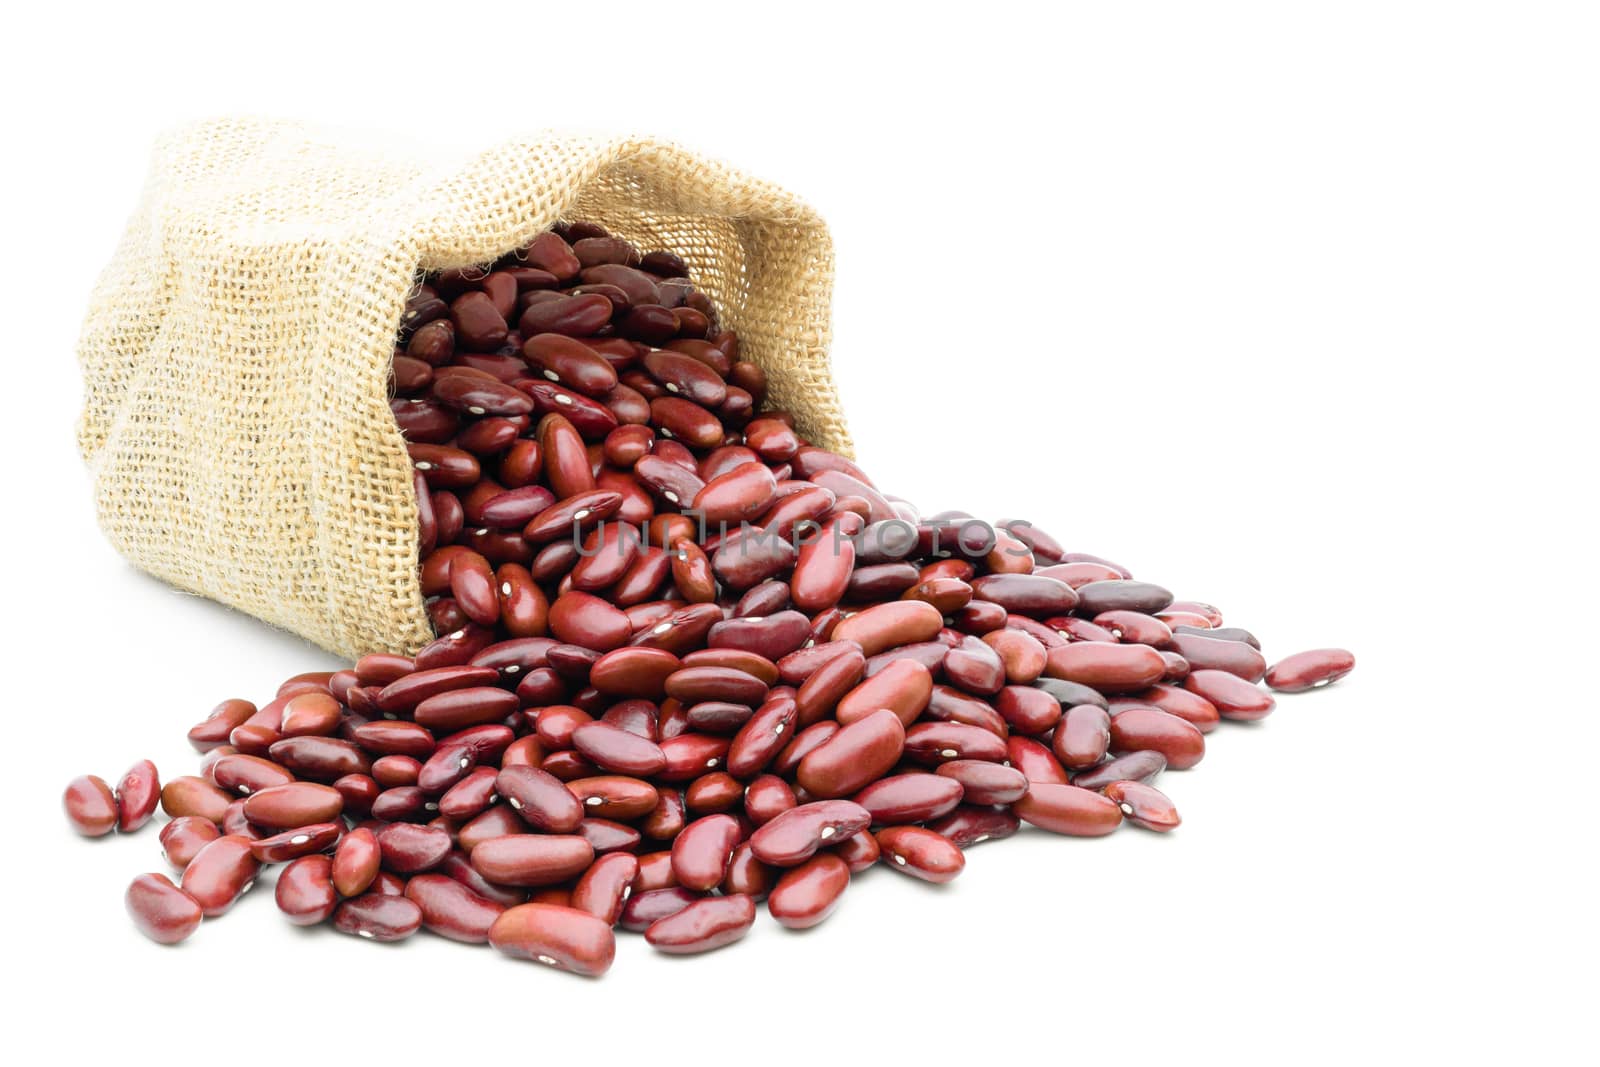 Grains Red beans in a sack on a white background by sompongtom